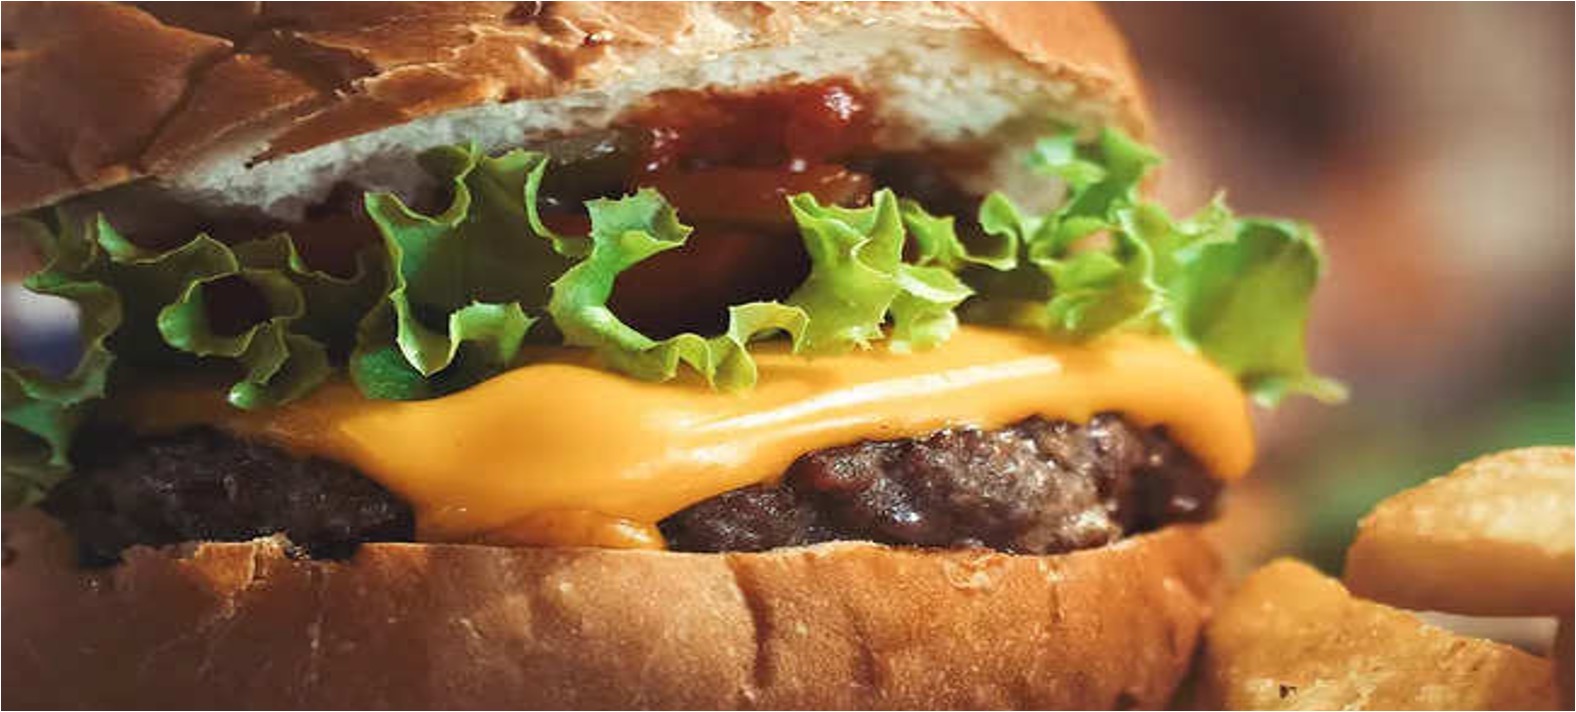 McDonald’s using cheap vegetable oil in place of cheese-FDA - Dairy News 7X7